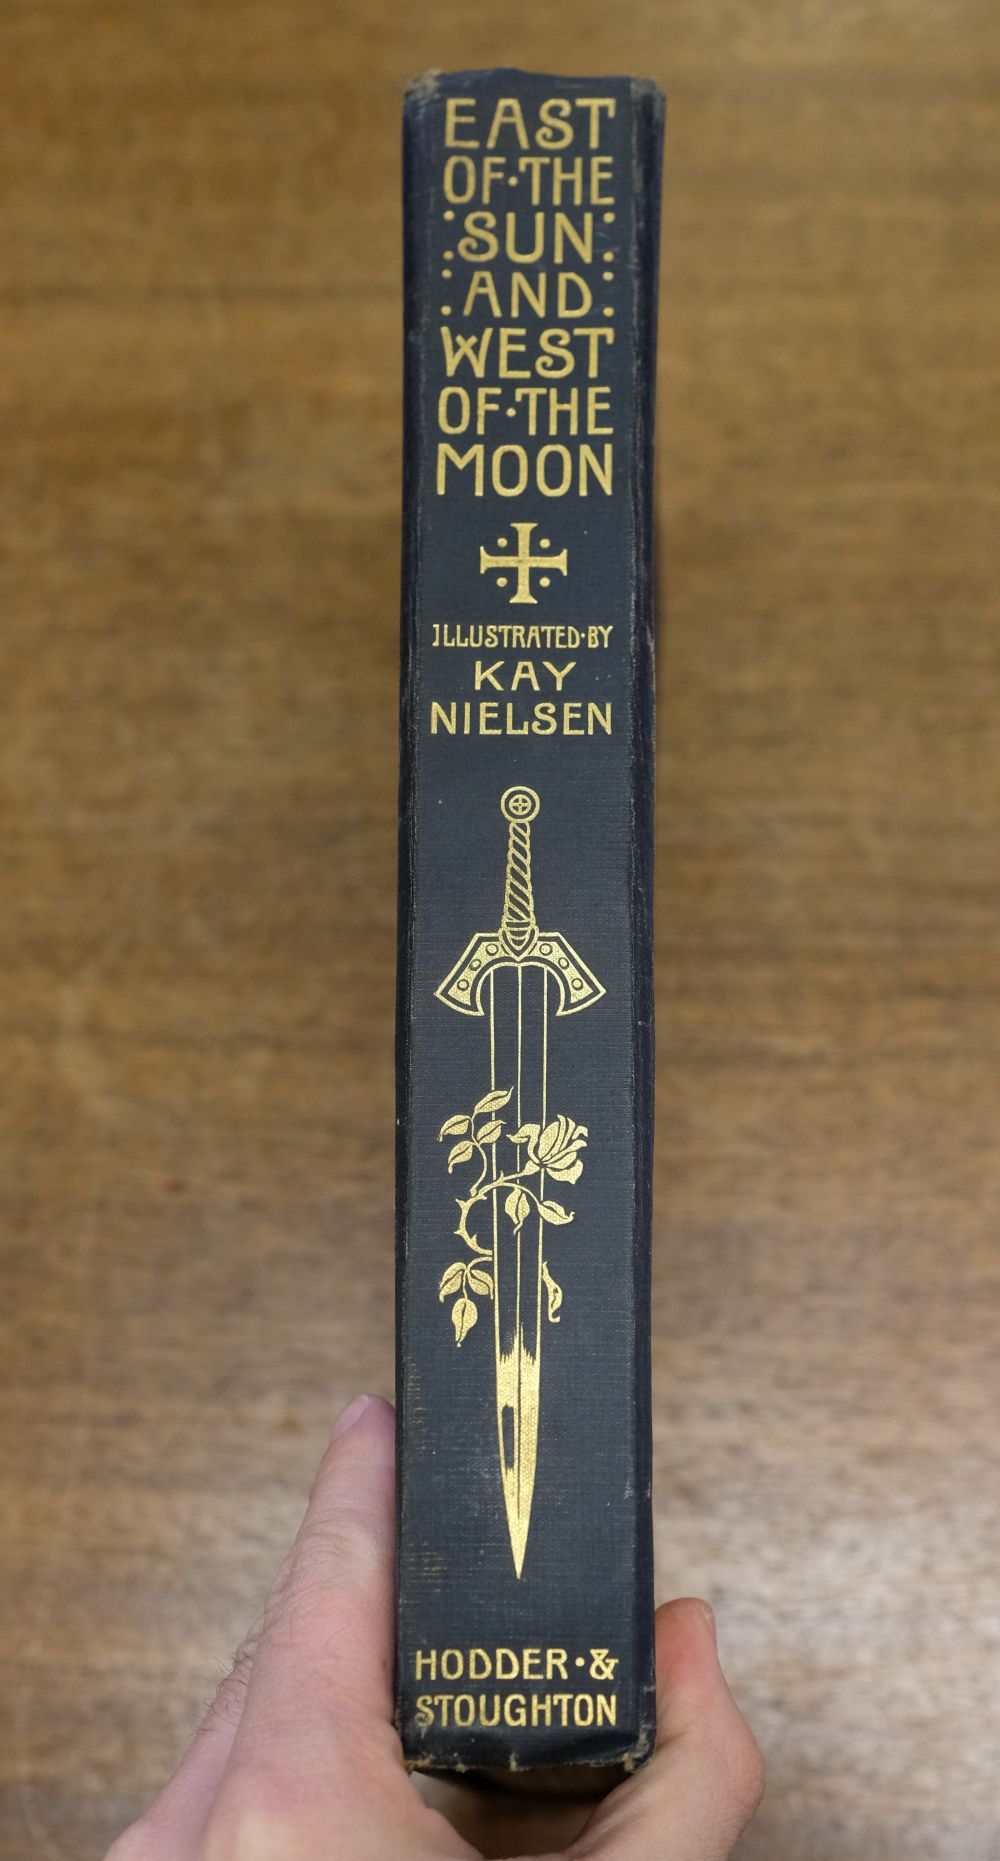 Nielsen (Kay, illustrator). East of the Sun and West of the Moon, [1914] - Image 3 of 10